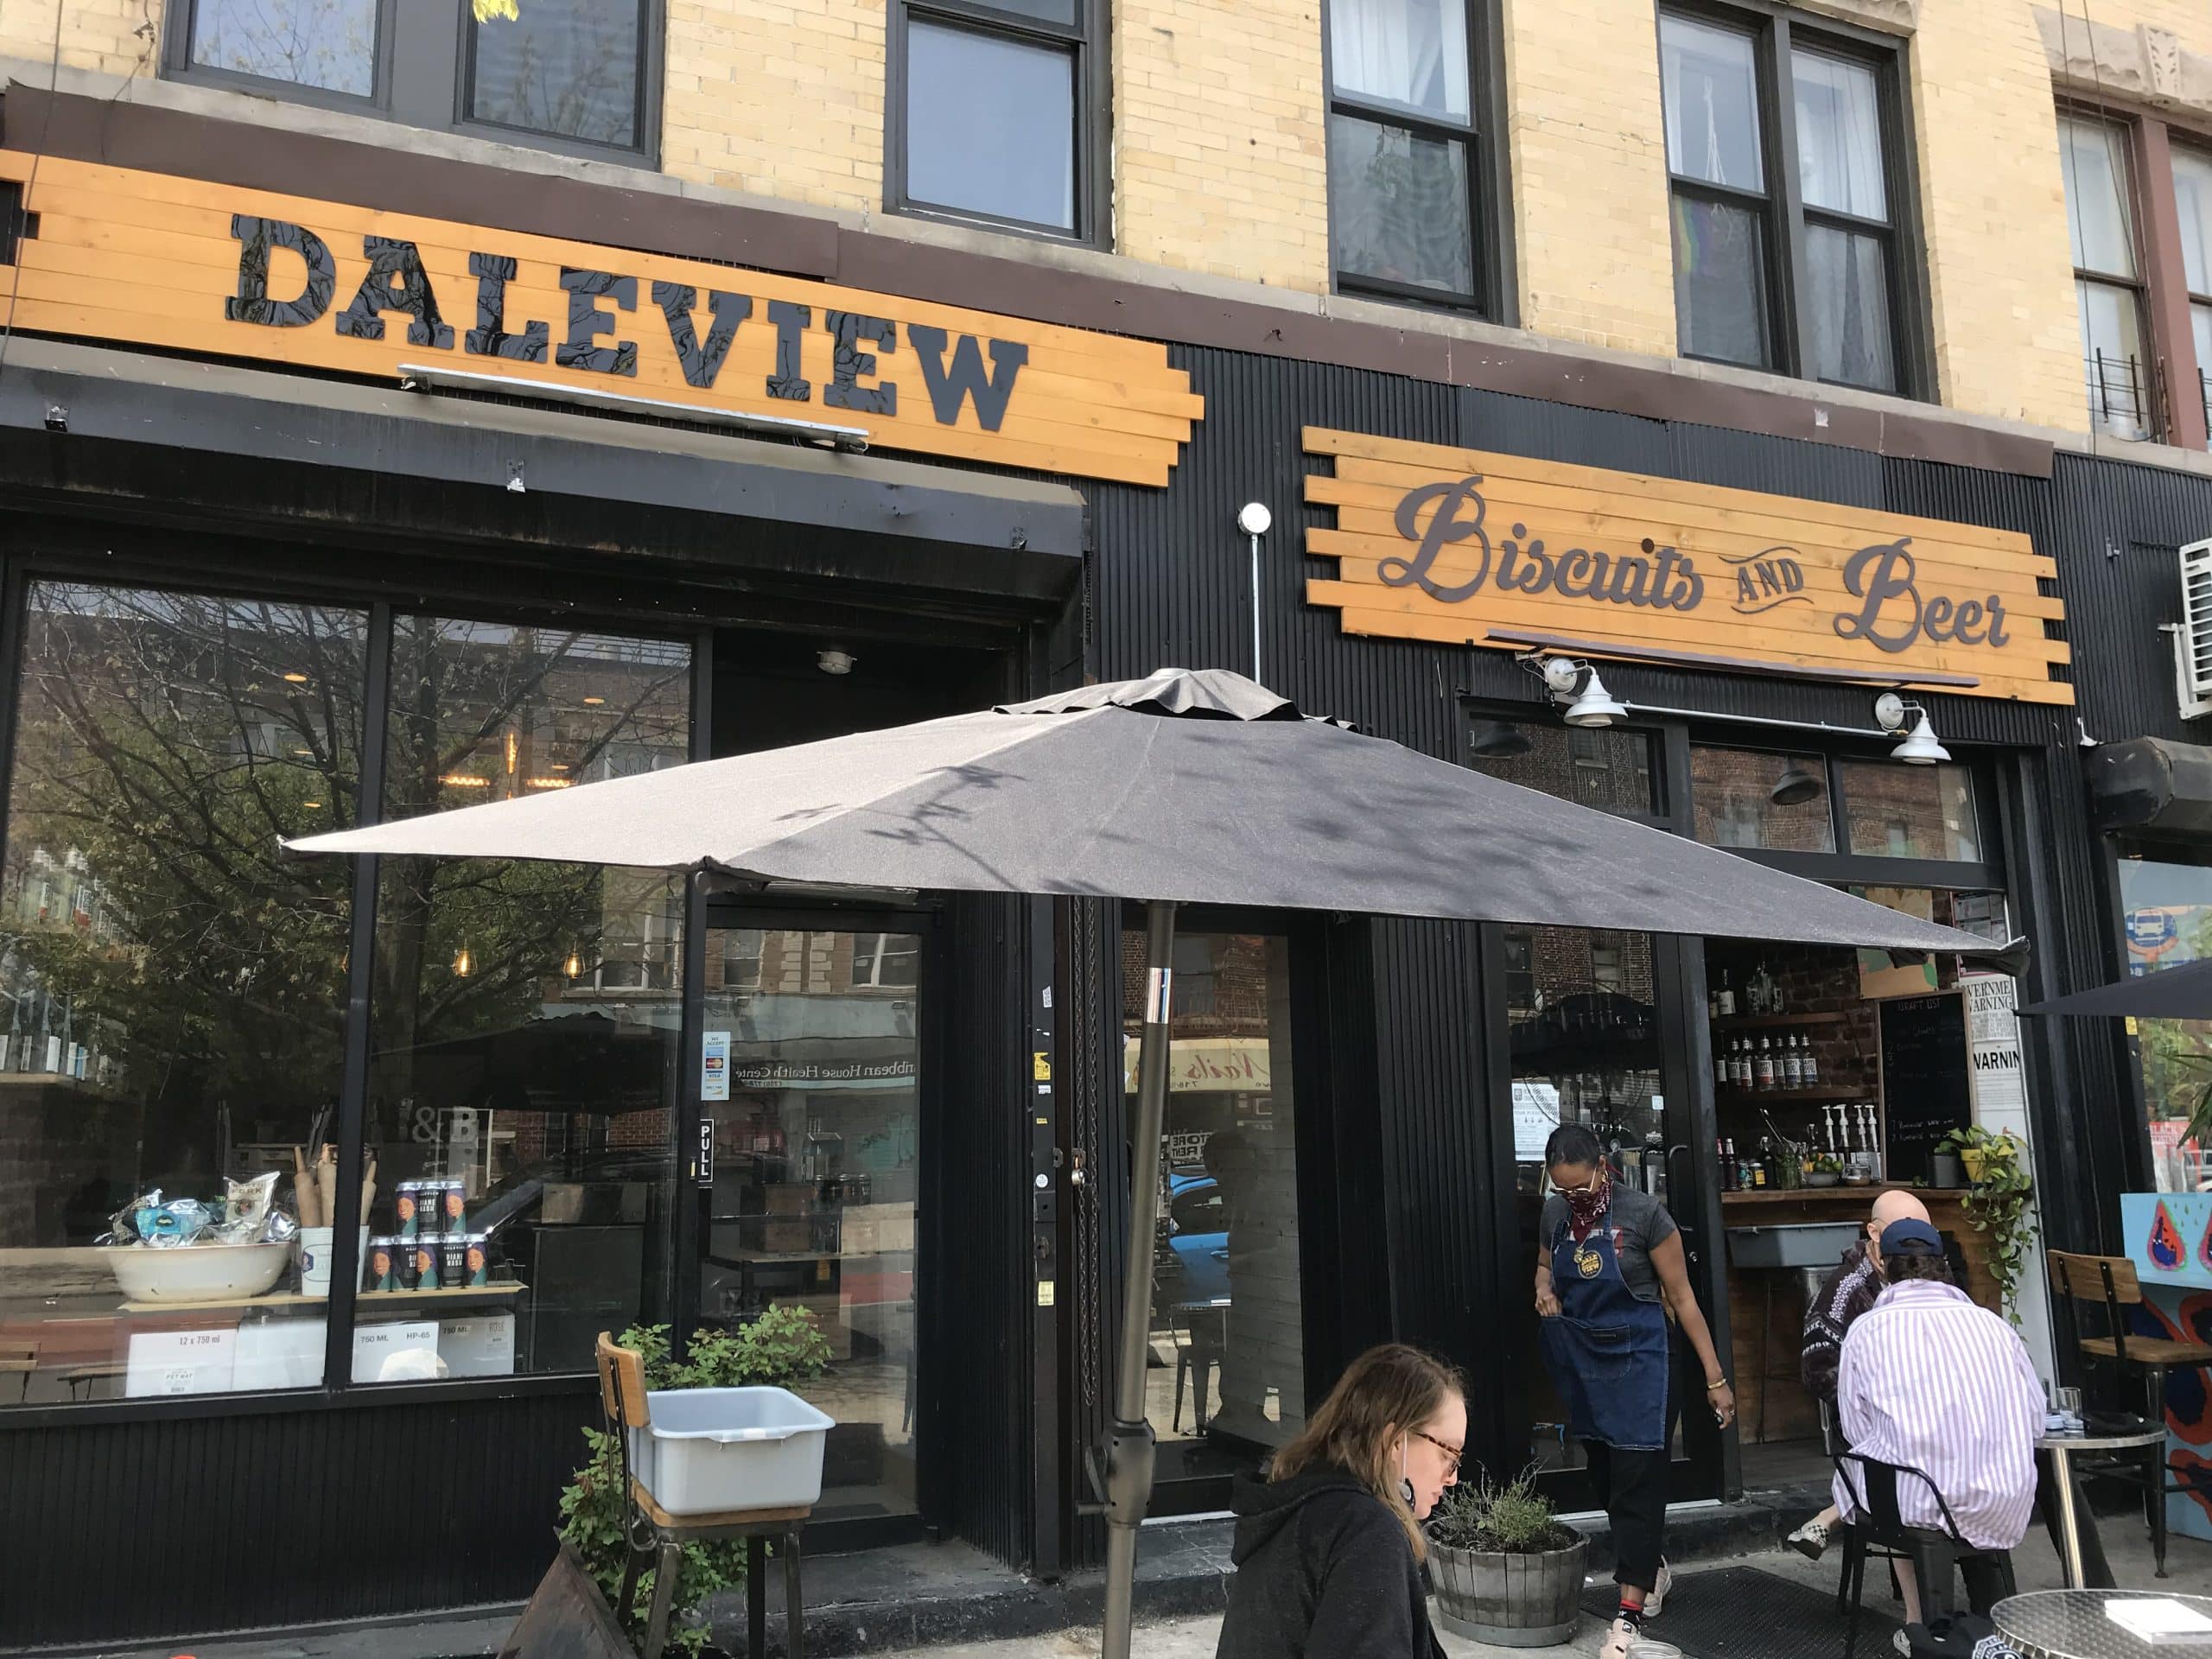 Daleview Brewery